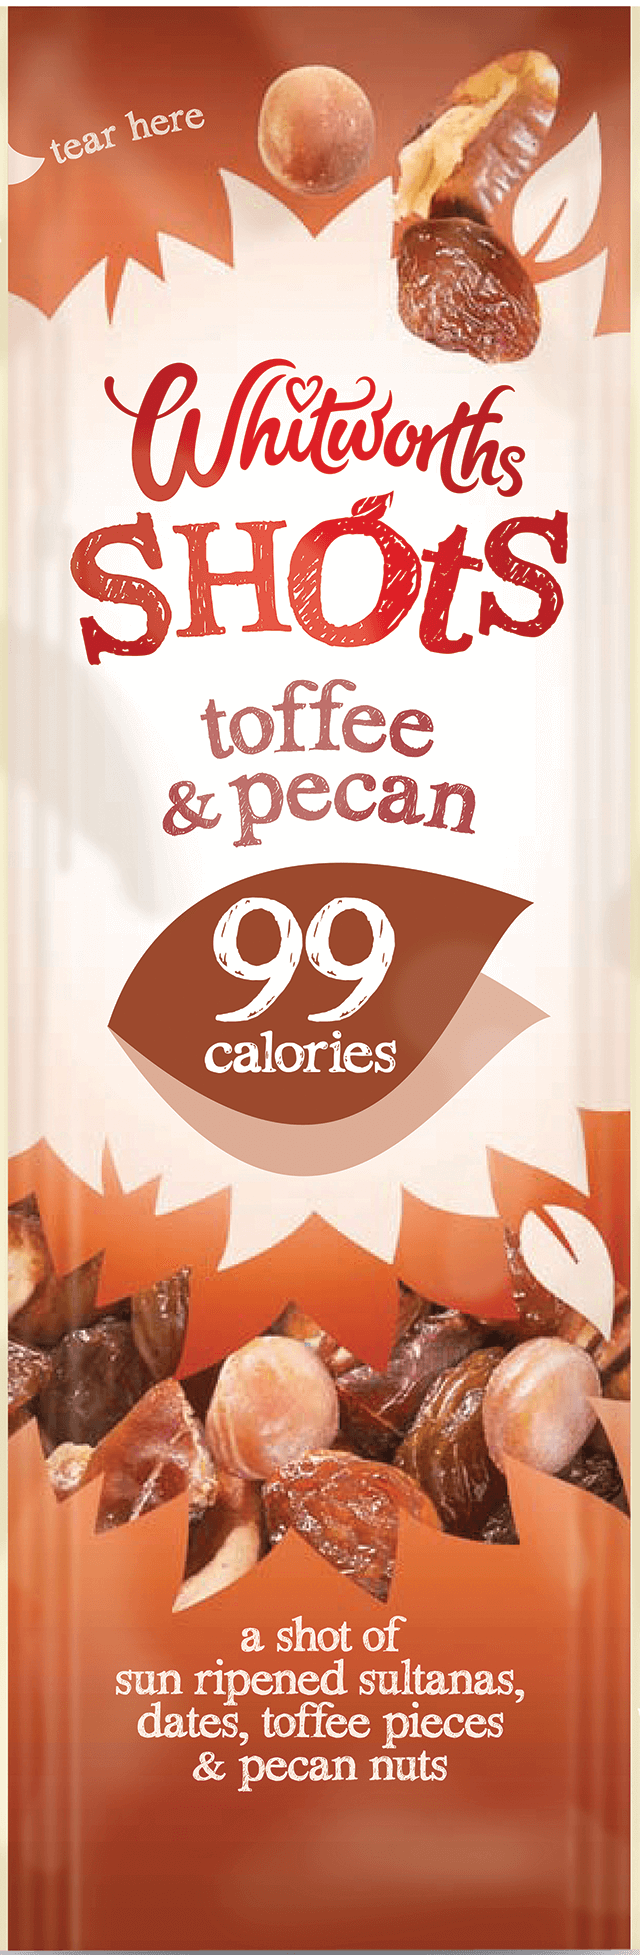 Whitworths Shots - Toffee & Pecan (99 calories)